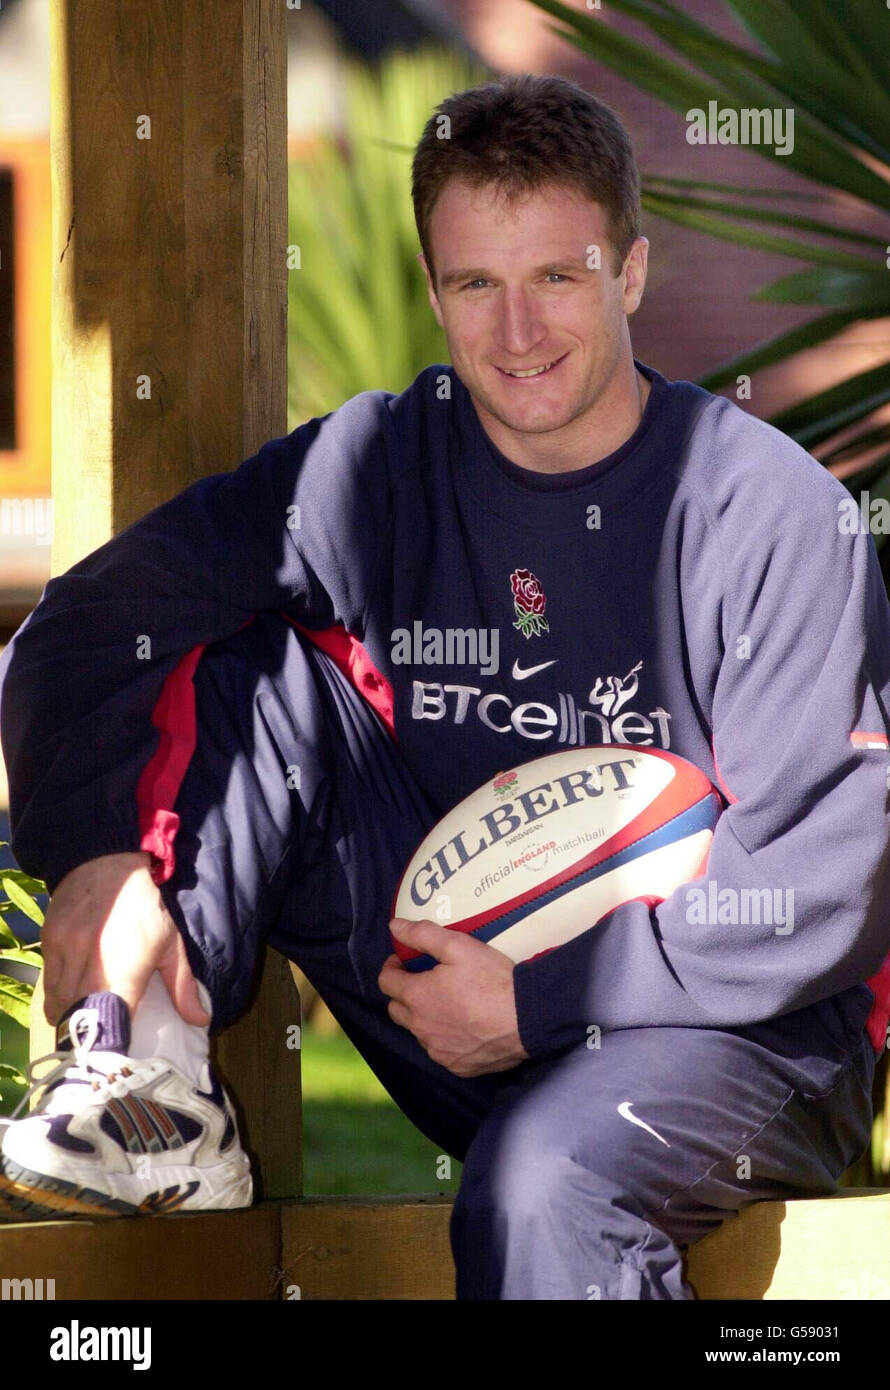 England Rugby Union team member Mike Catt at the team base in Bagshot, Surrey, ahead of their Six Nations Championship match against Italy at Twickenham on 17/02/01. Catt is in the squad to face Italy. Stock Photo